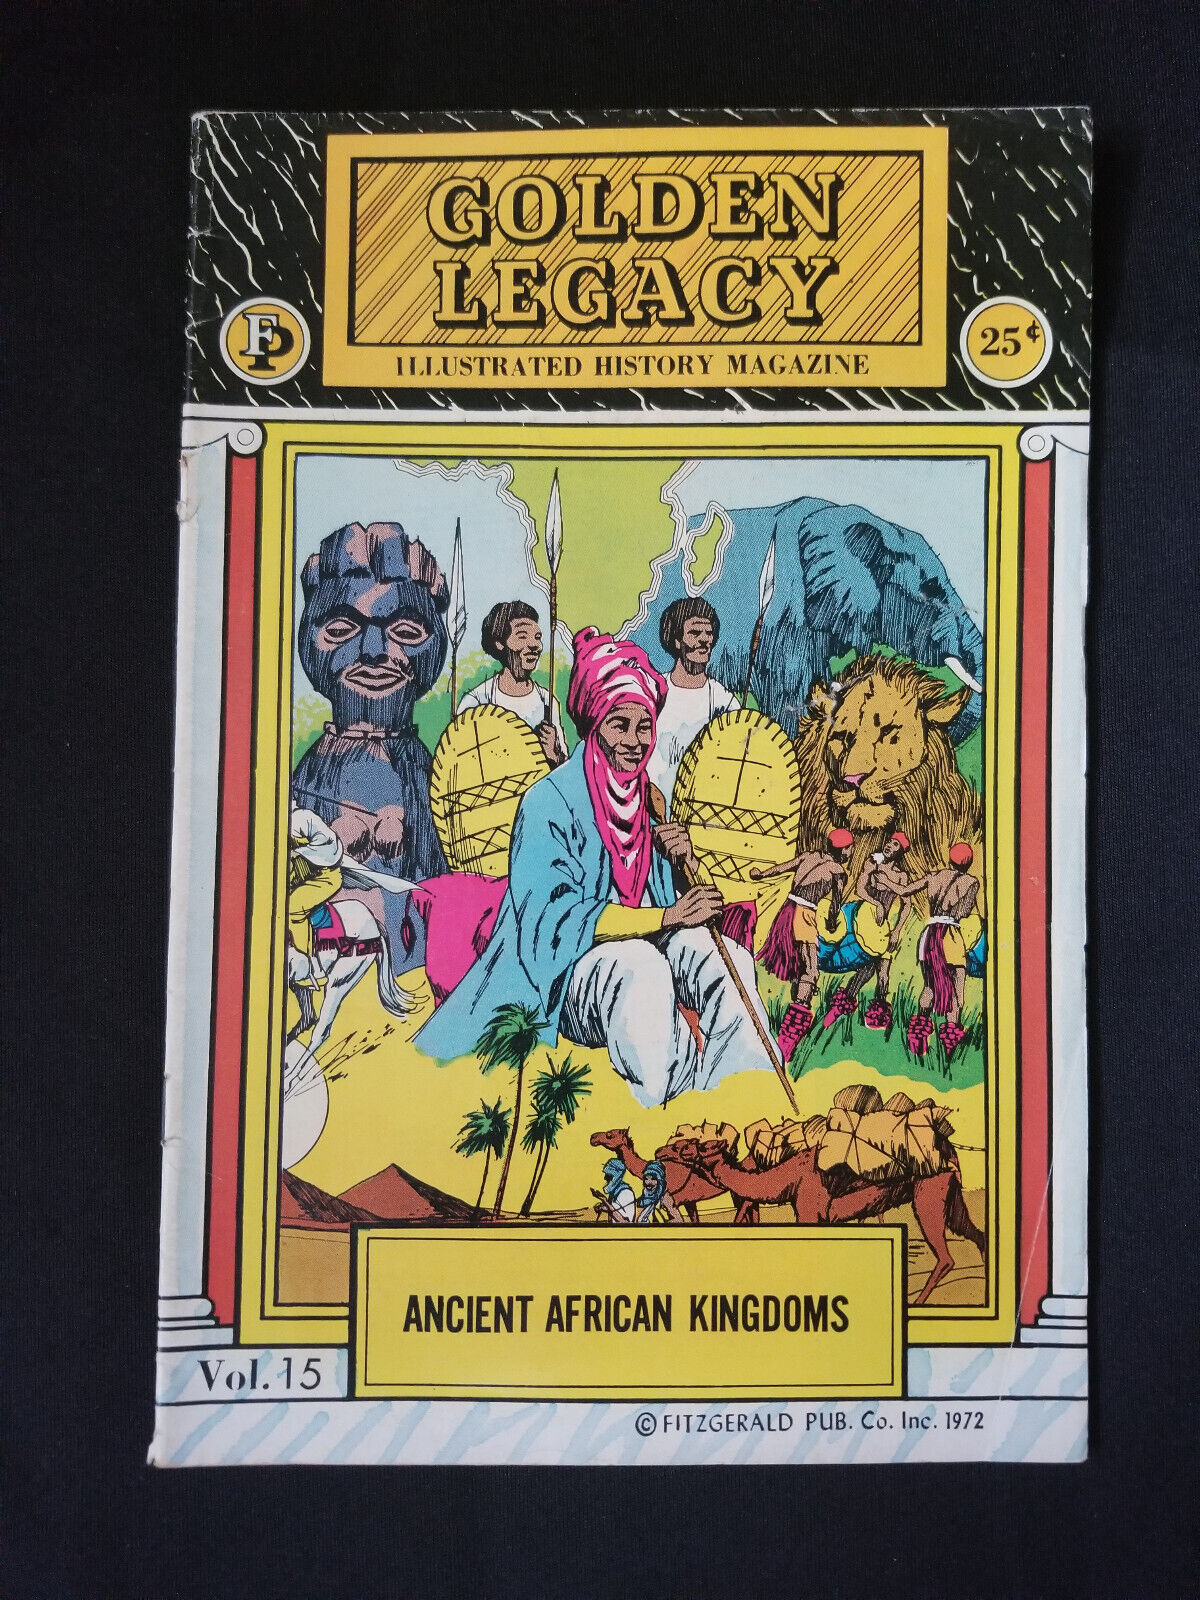 Golden Legacy Vol 15 Ancient African Kingdoms 1972 Illustrated History Magazine